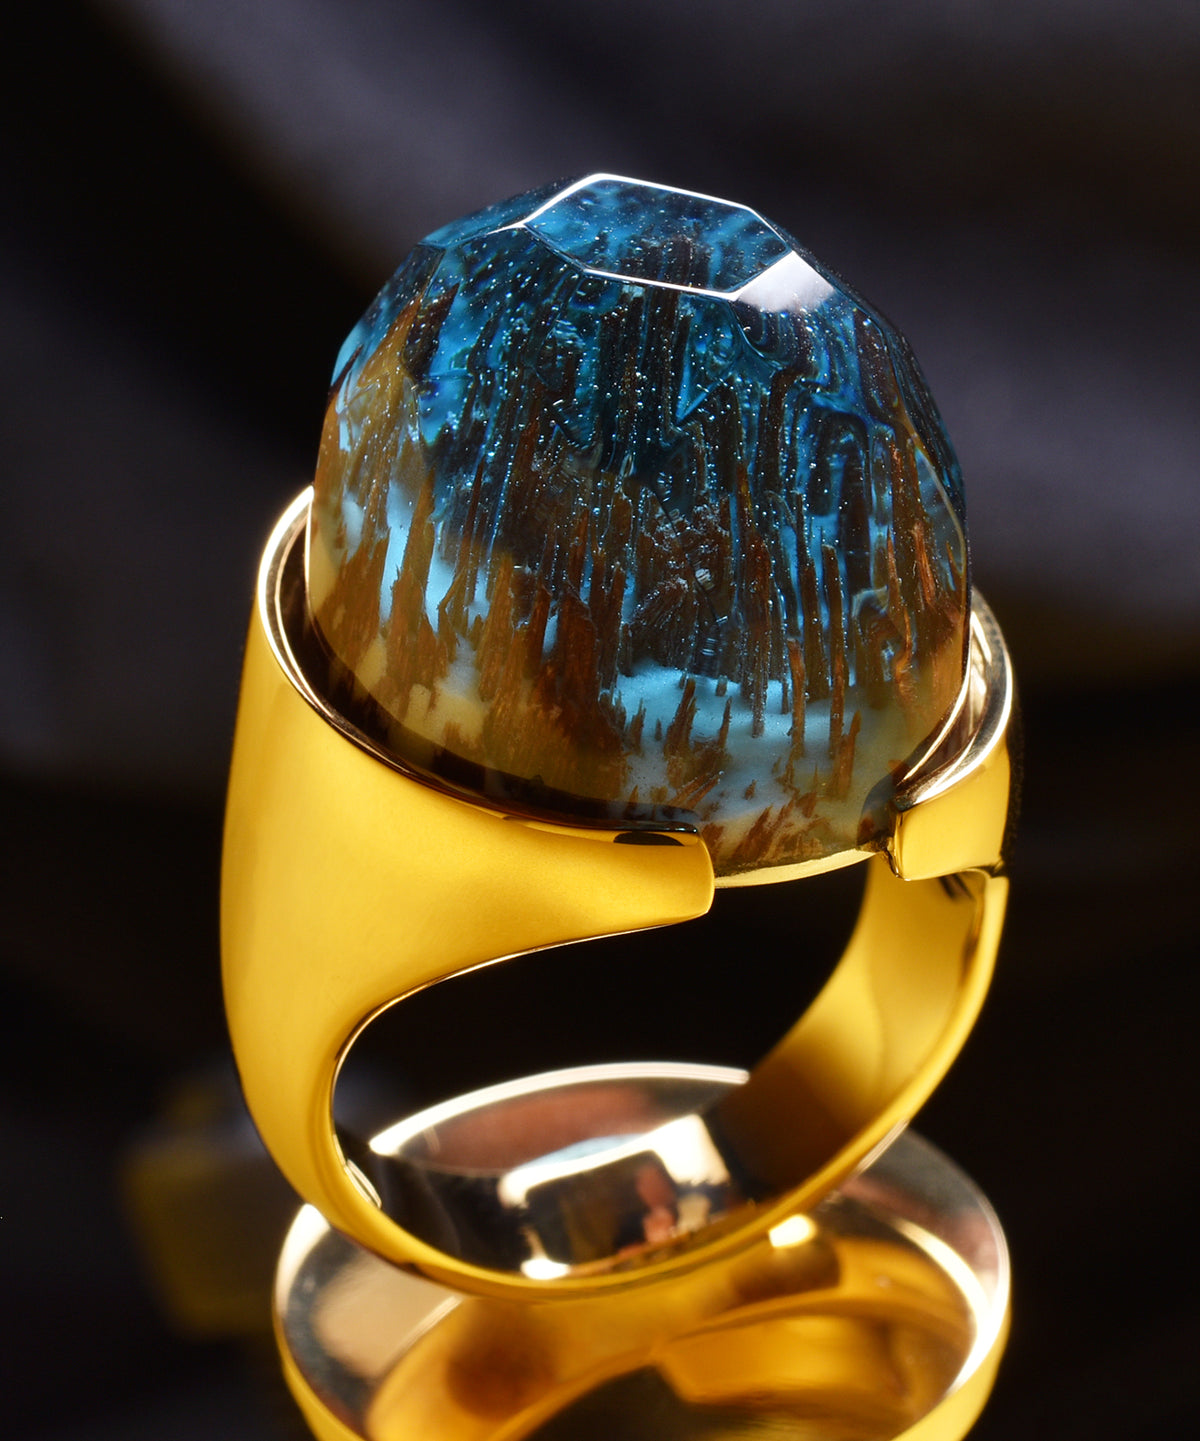 Enchanted Wooden Rings